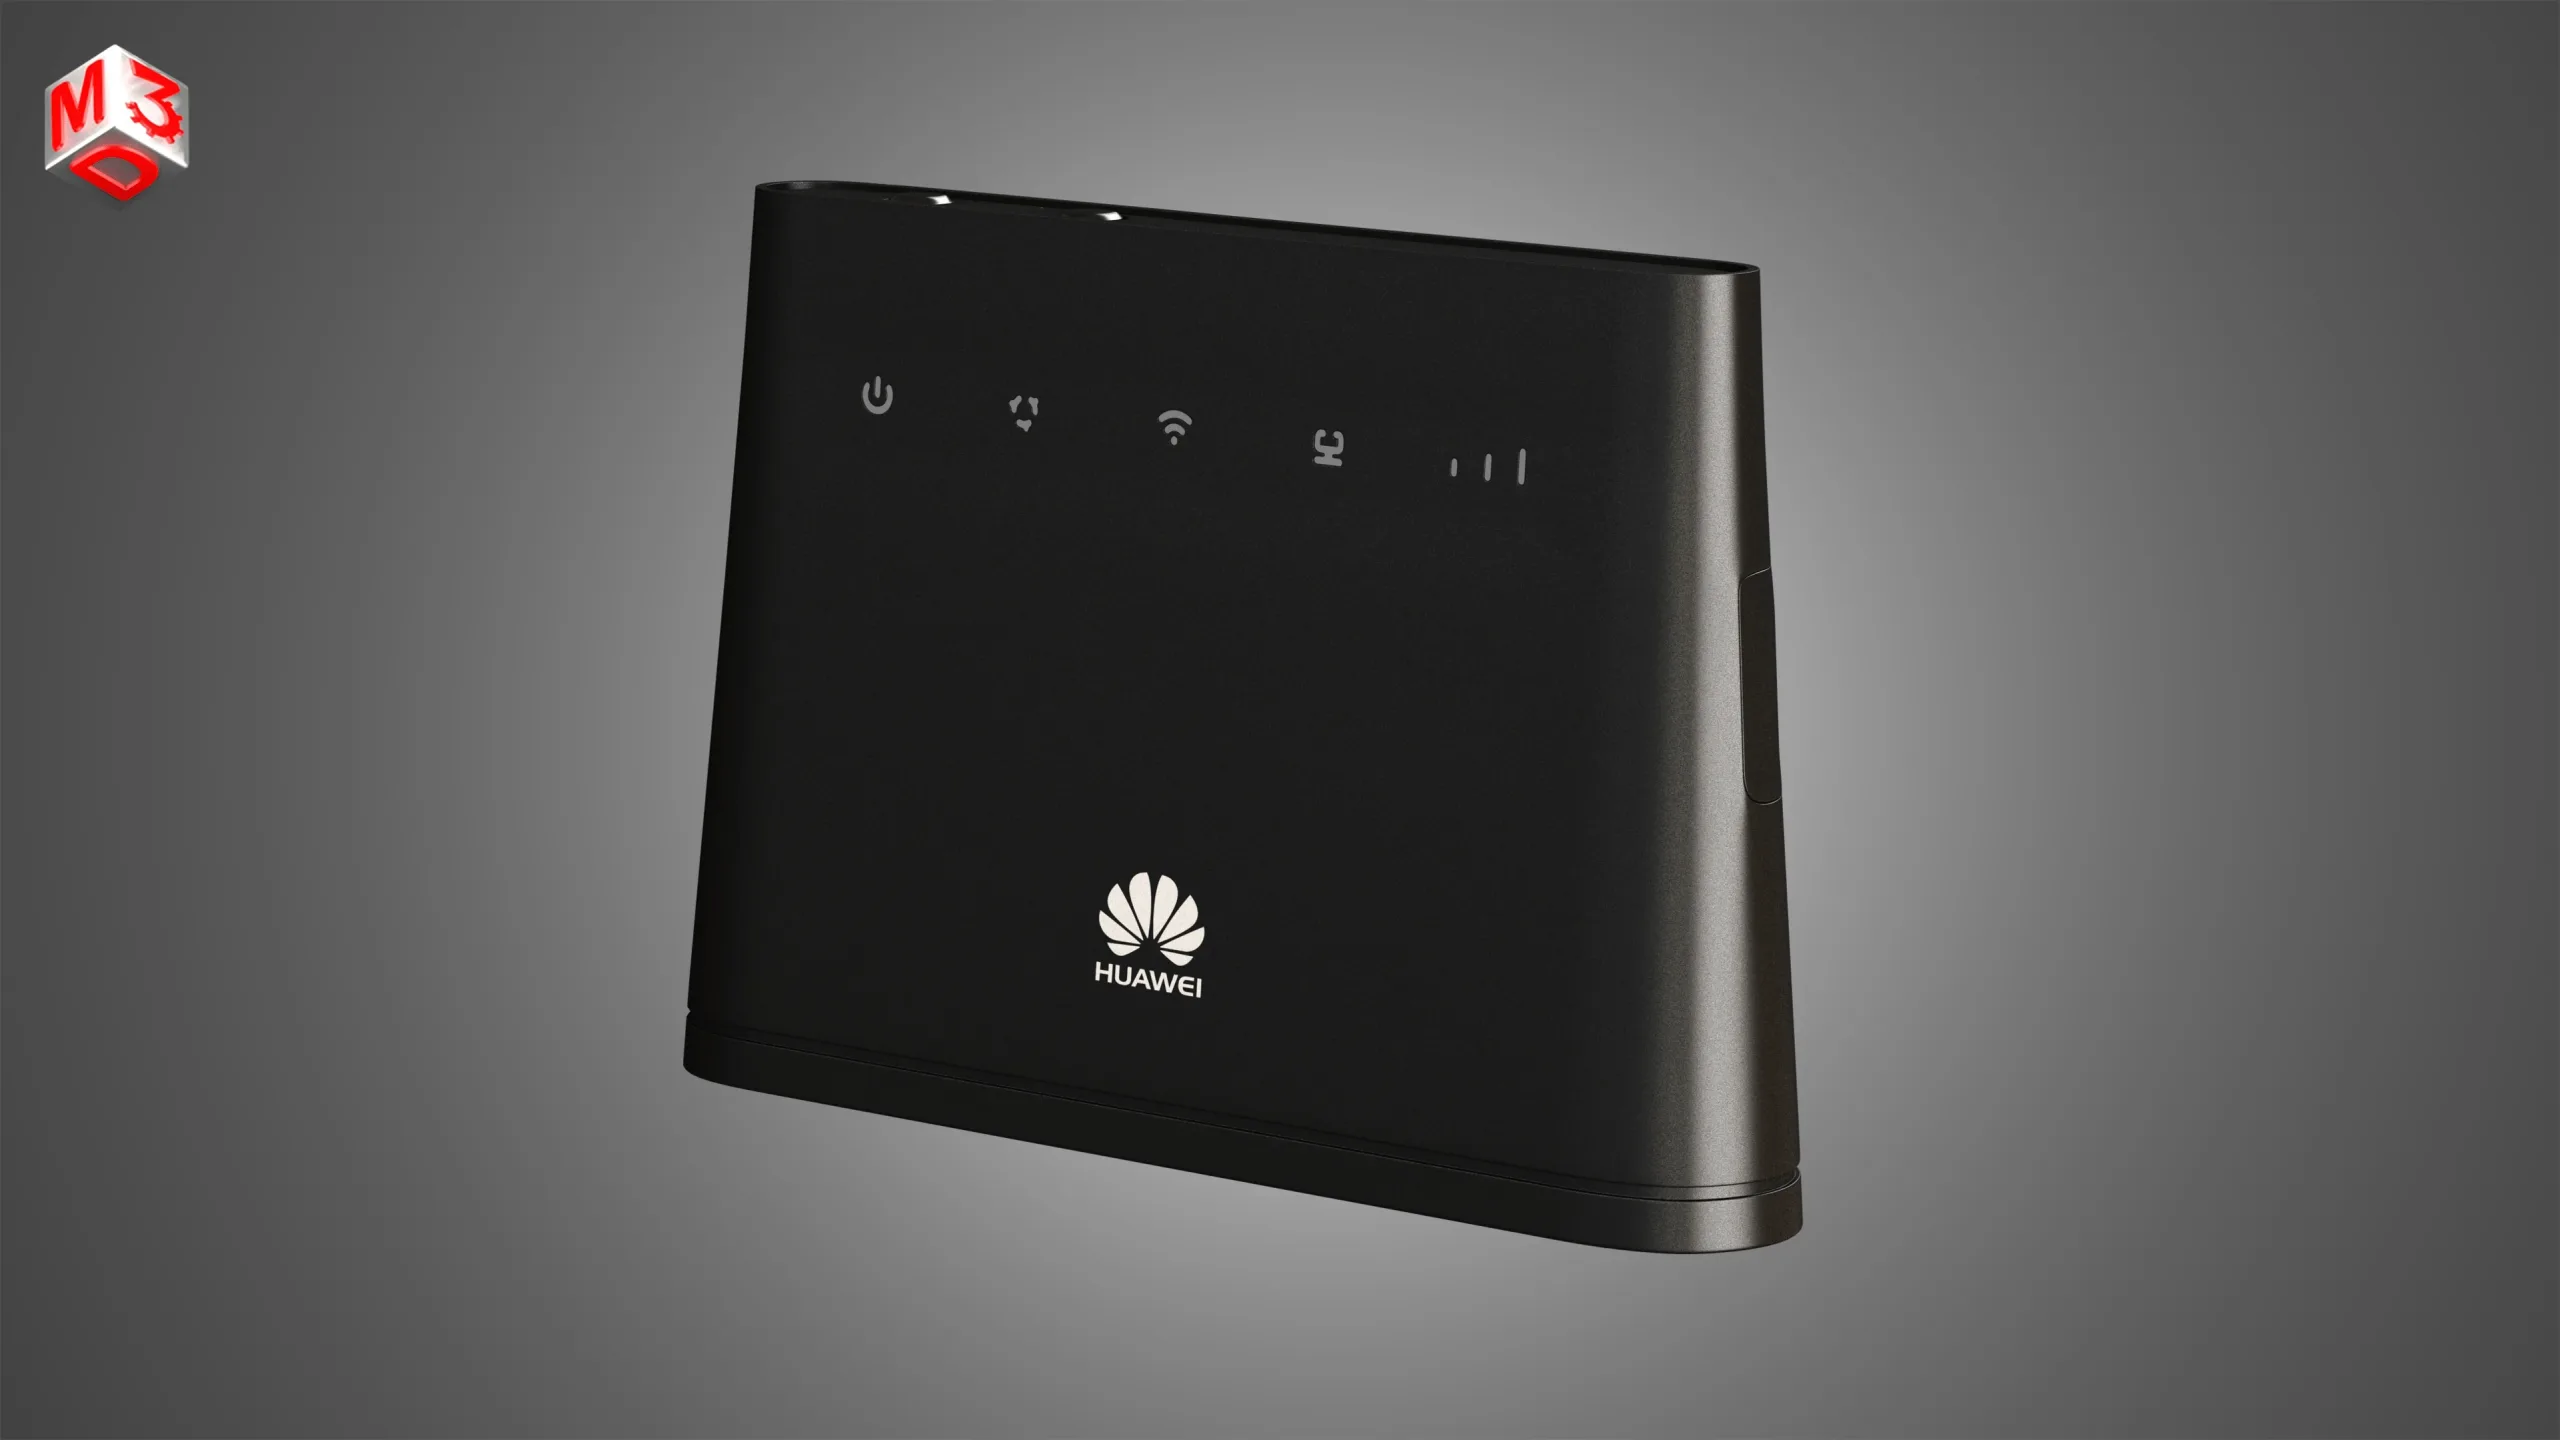 Huawei Lte Cpe B310 Router 3d Flippednormals 4232